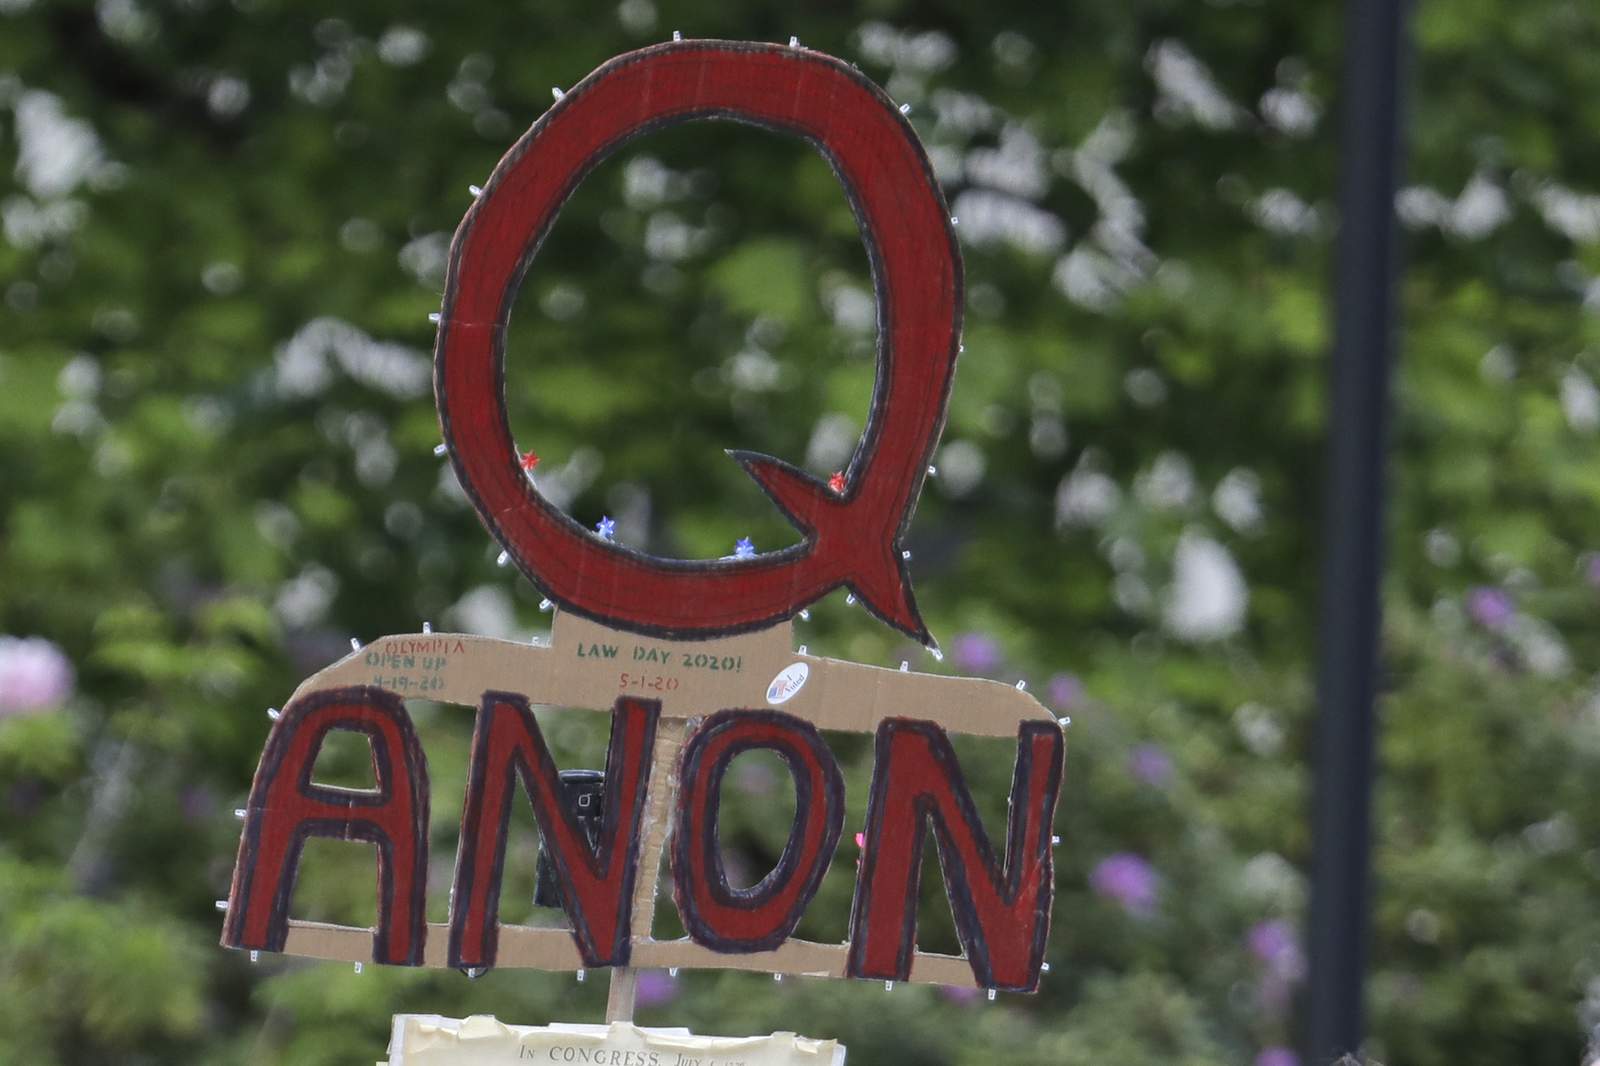 Facebook says it will ban groups that openly support QAnon